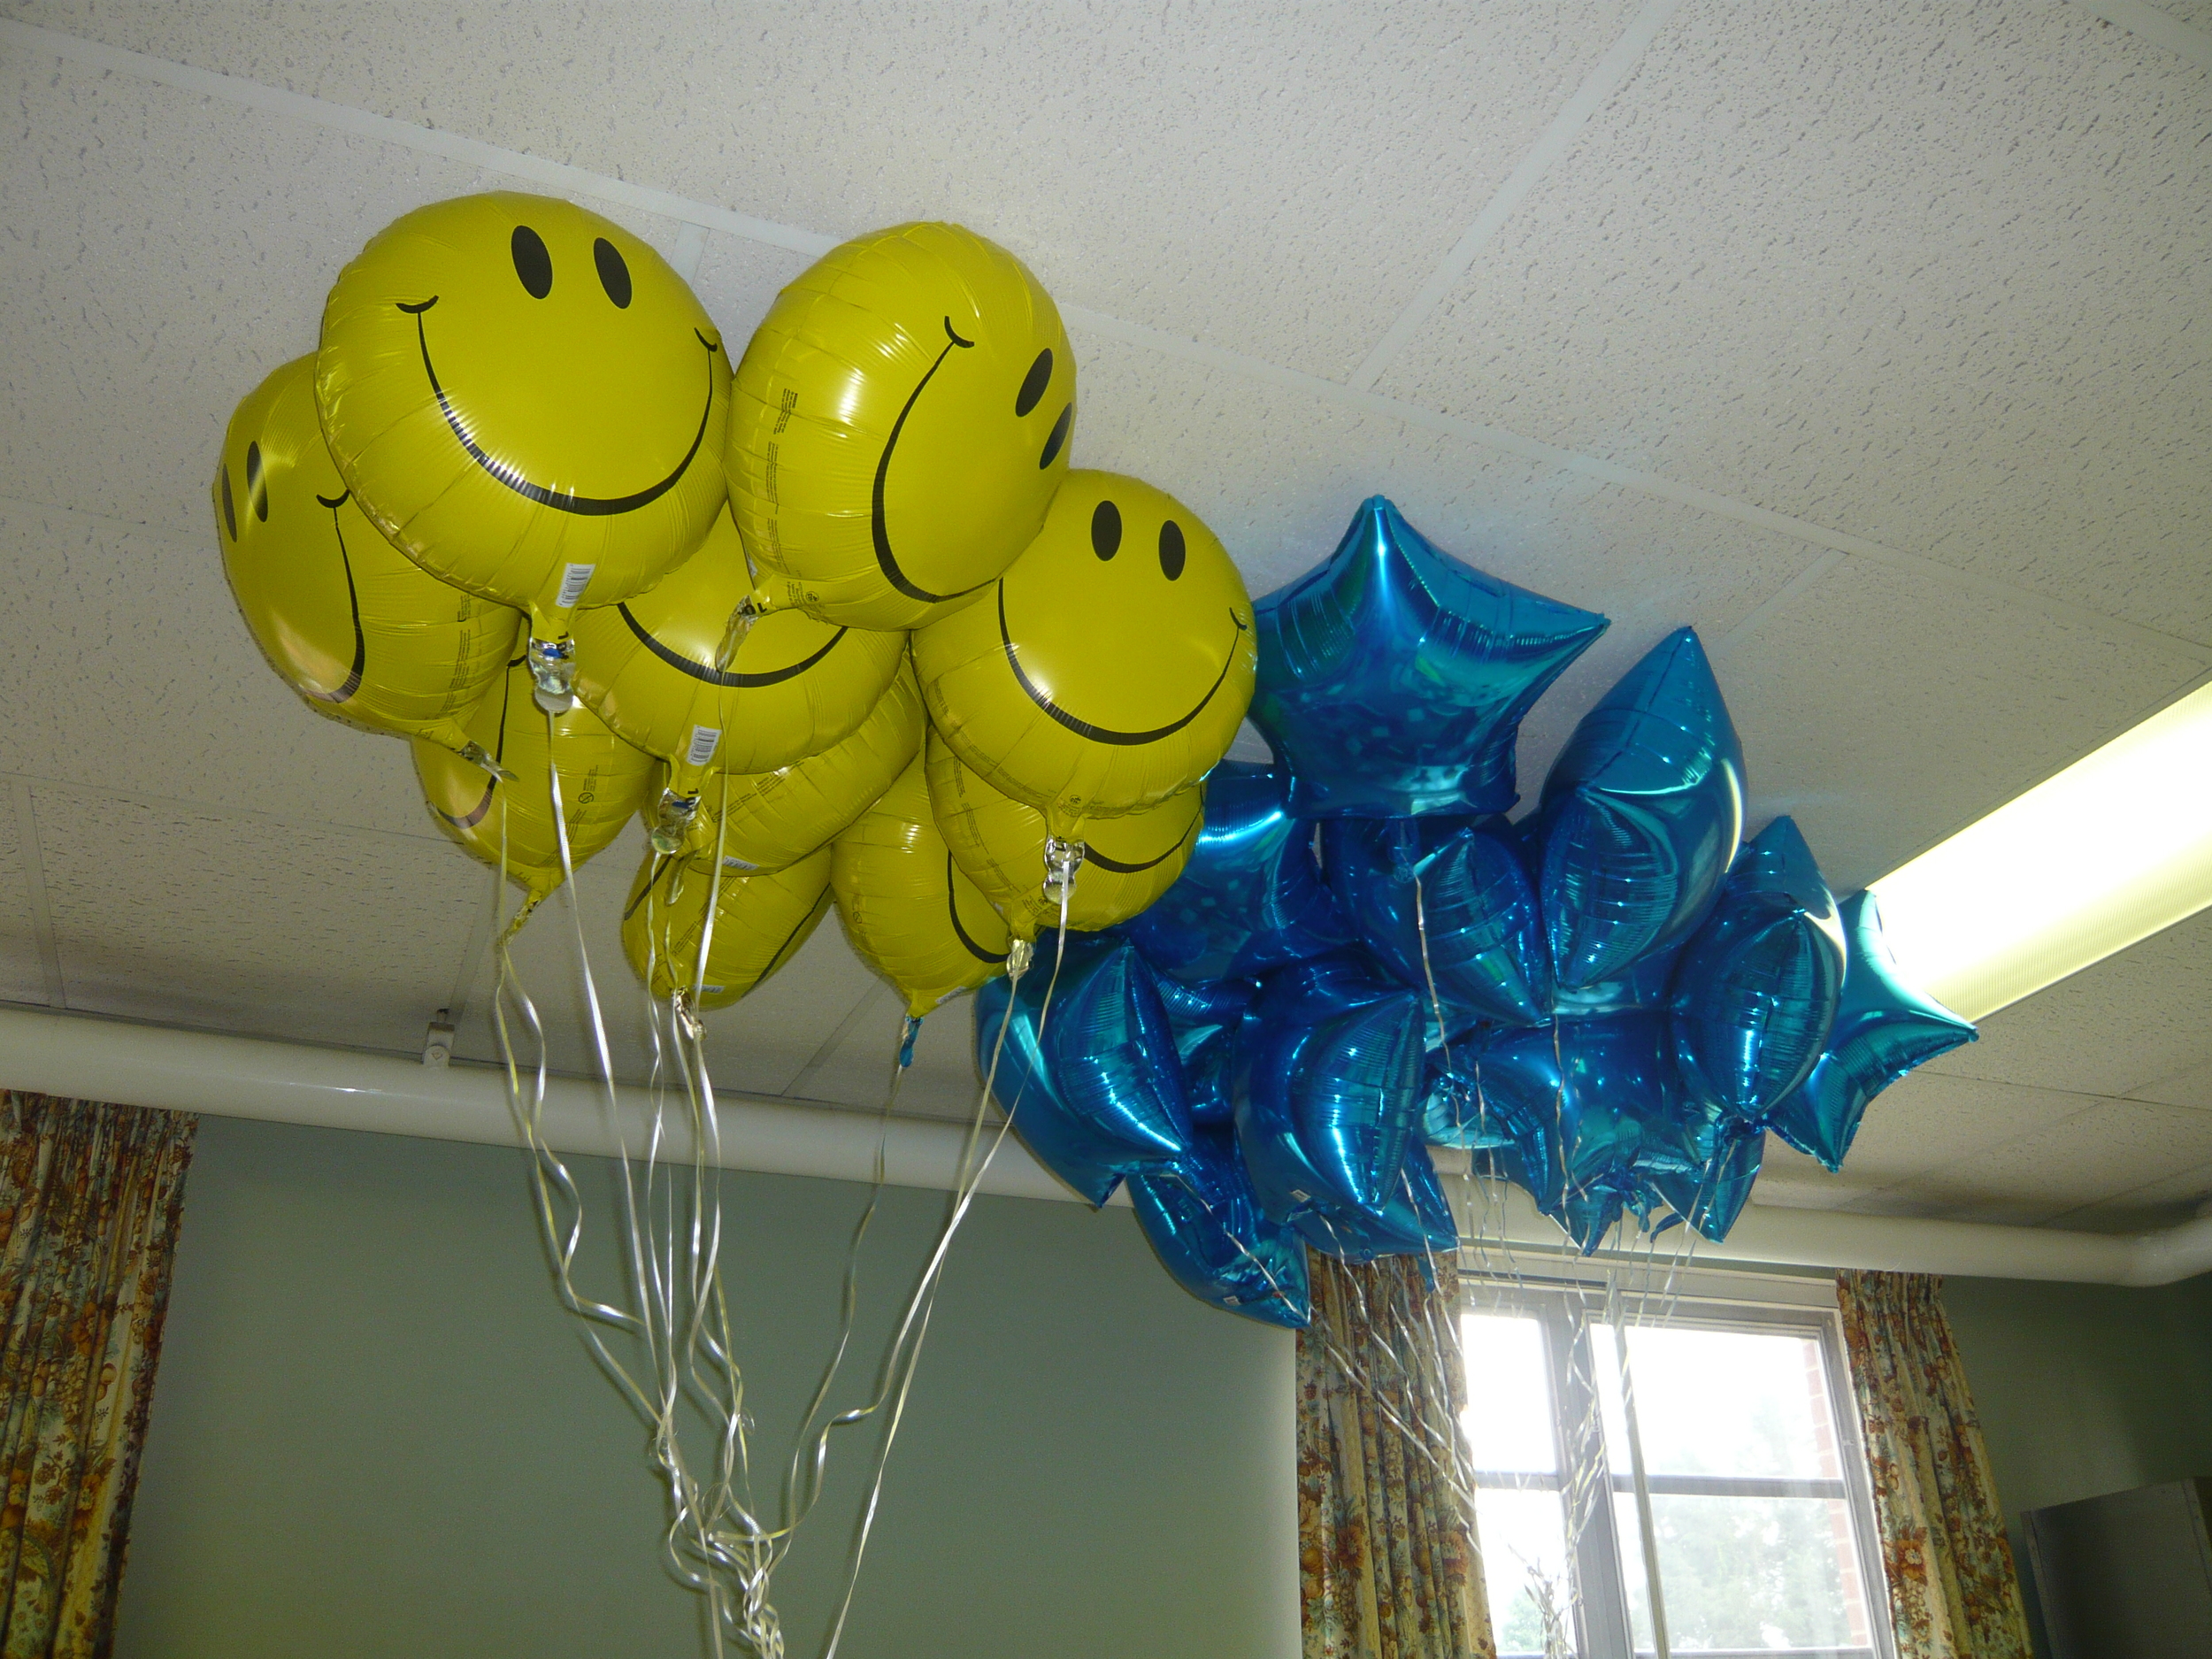  Balloons, balloons, and more balloons! Smiley-face balloons were used to indicate check out and blue balloons got category signs taped to them to tell what items went to each table!   